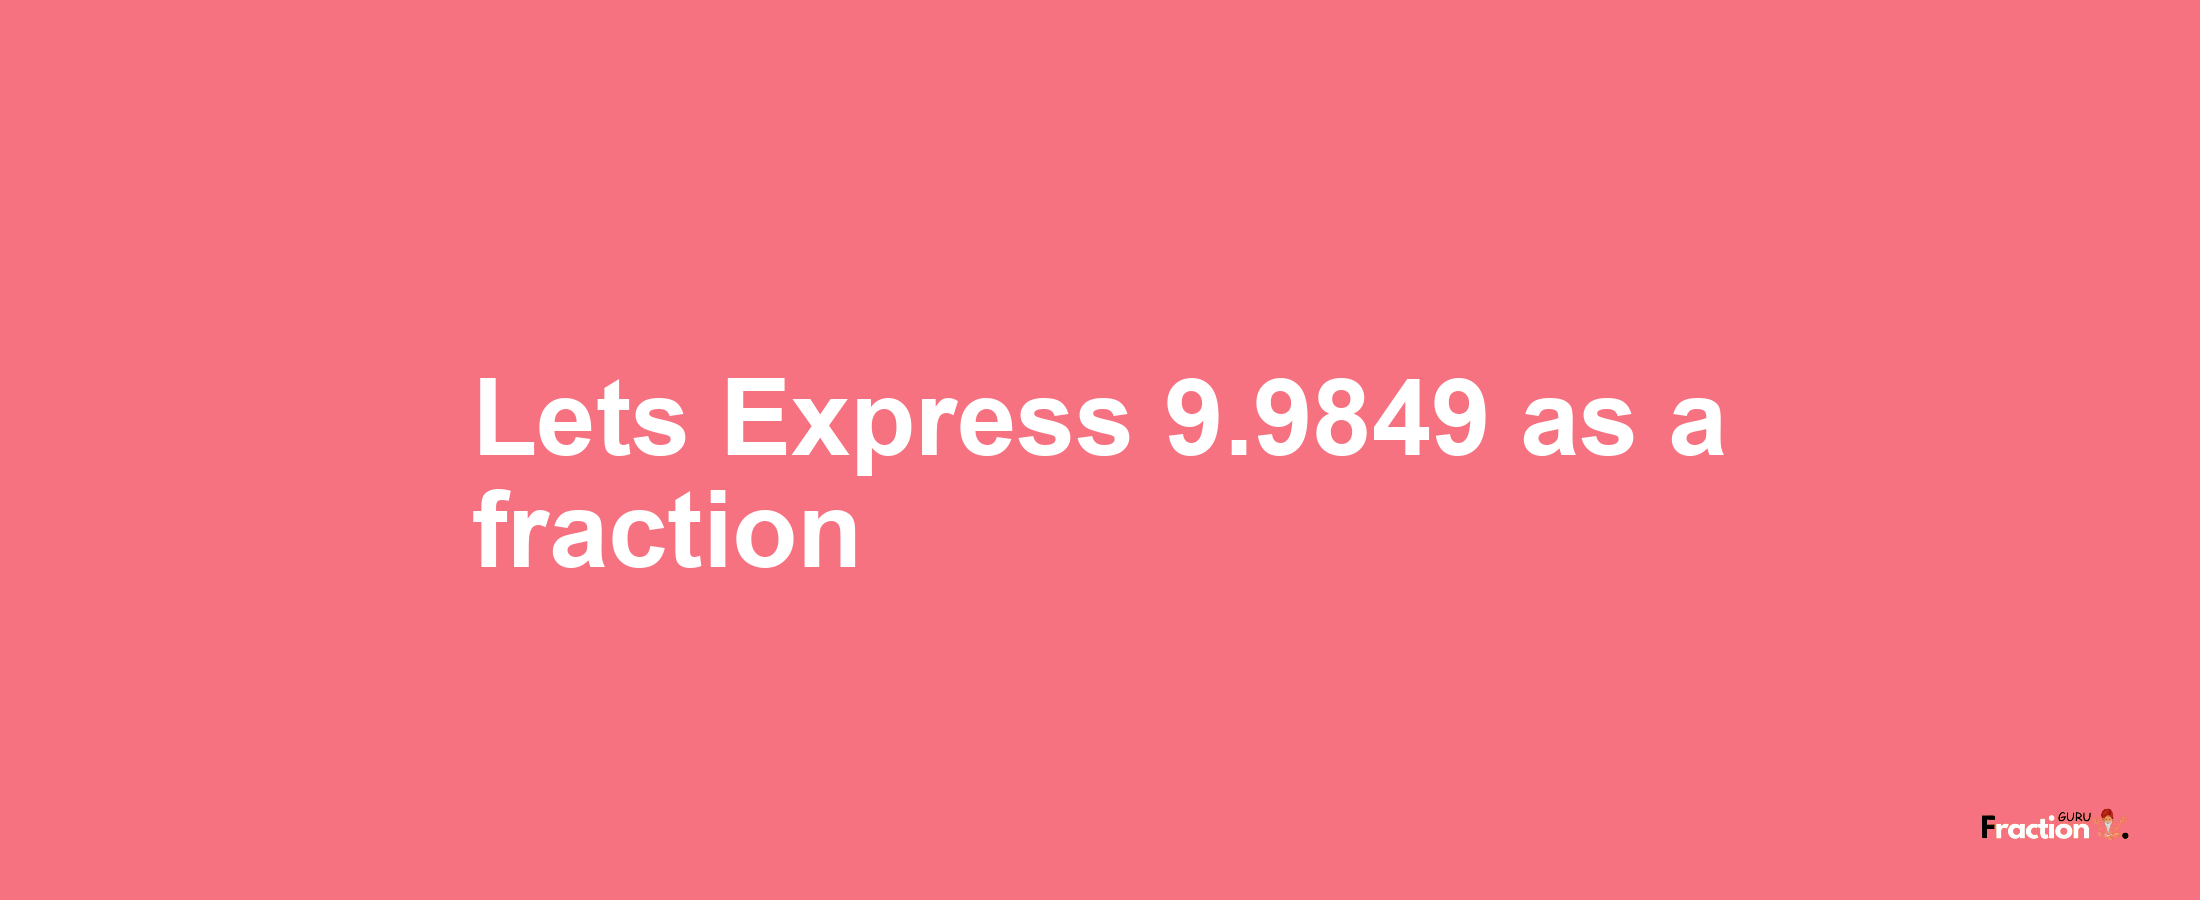 Lets Express 9.9849 as afraction